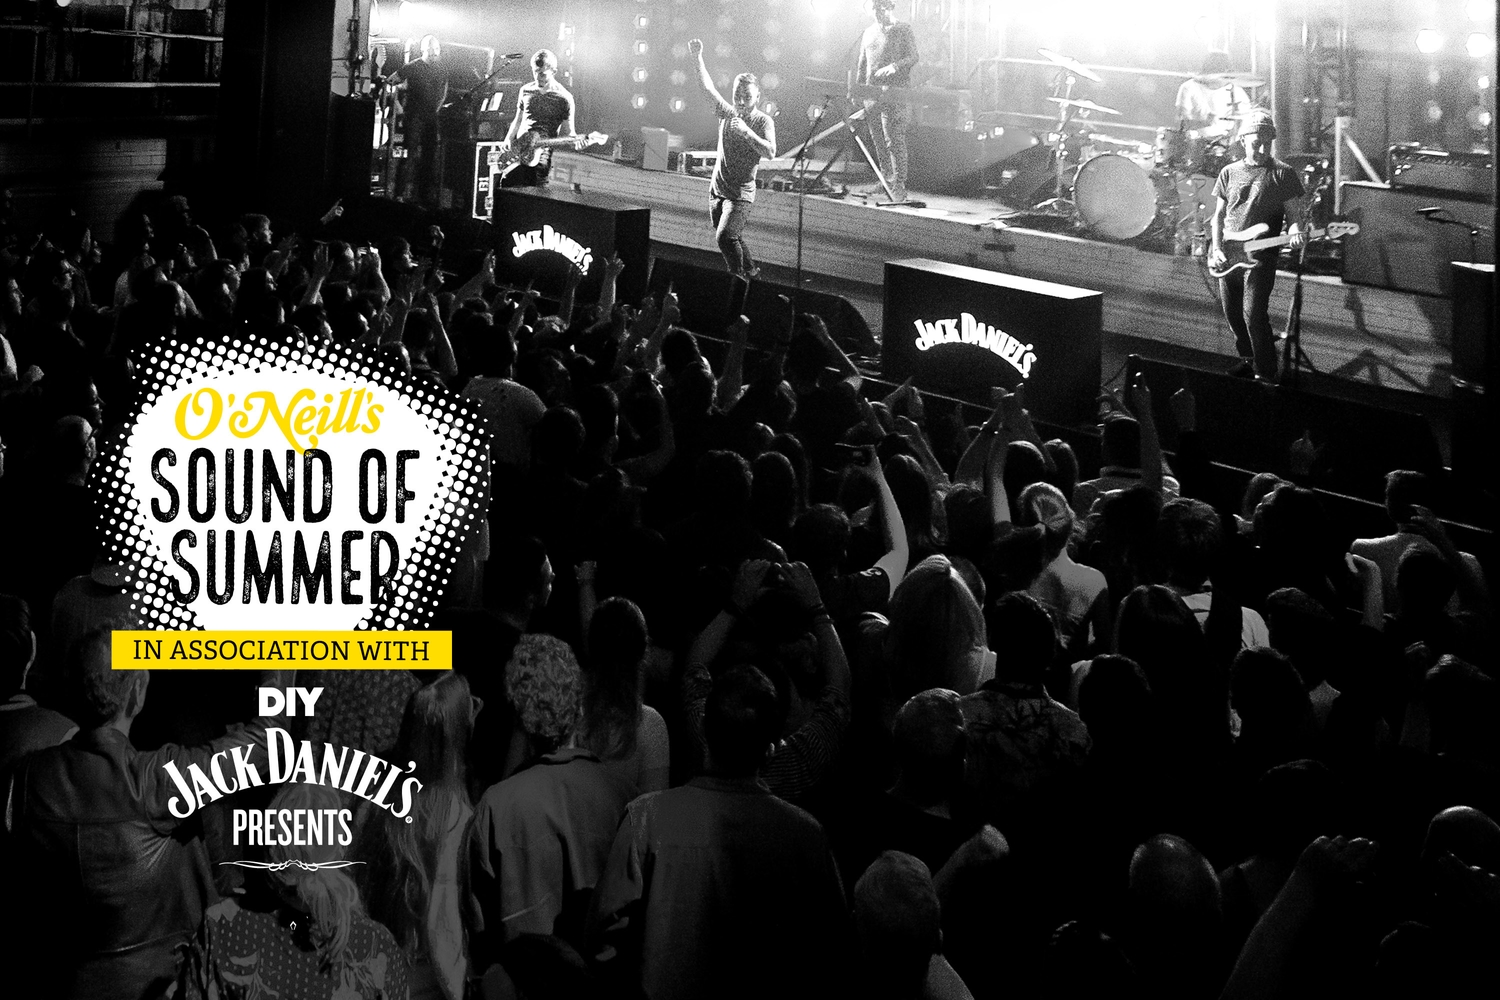 Win the chance to play at 2019’s edition of Jack Daniel’s Presents’ with the Sound of Summer